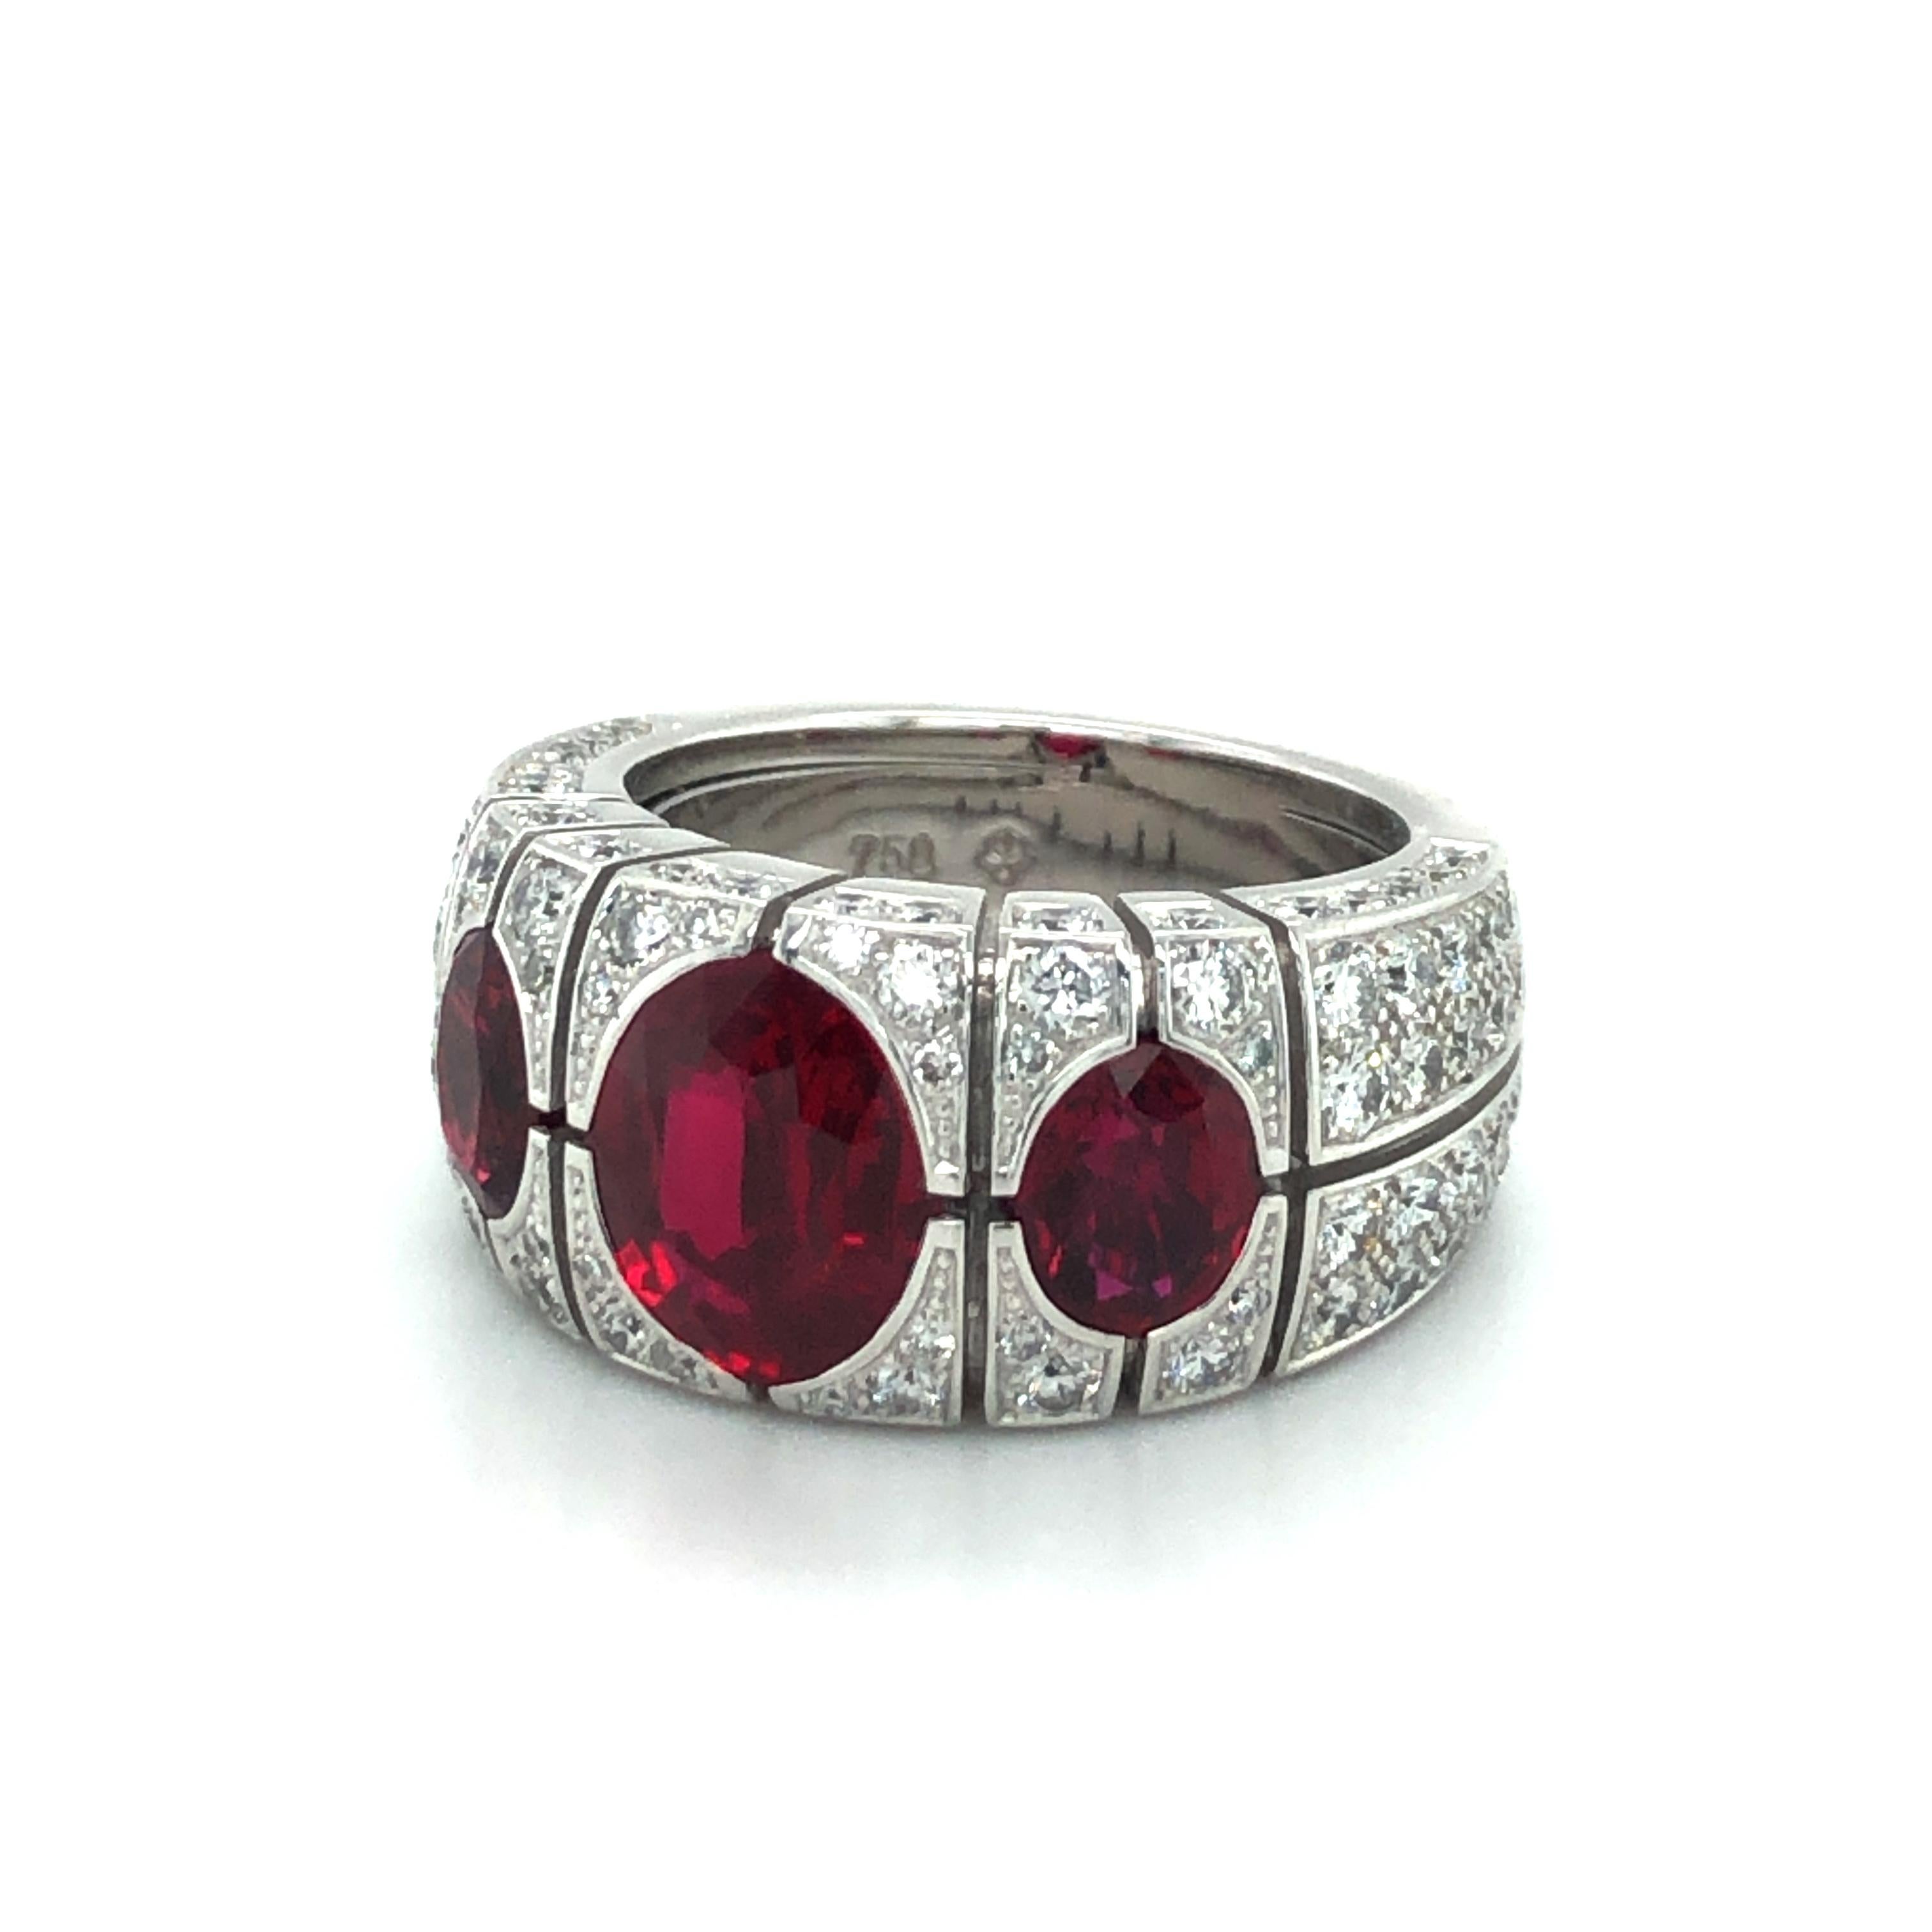 This stunning ring by reknown Swiss jeweller Péclard features an oval-shaped, vibrantly coloured 2.36 carat Burma ruby. Flanked by two oval-shaped equally lively rubies of approximately 1.00 carat each.
The setting is artfully crafted in 18 karat